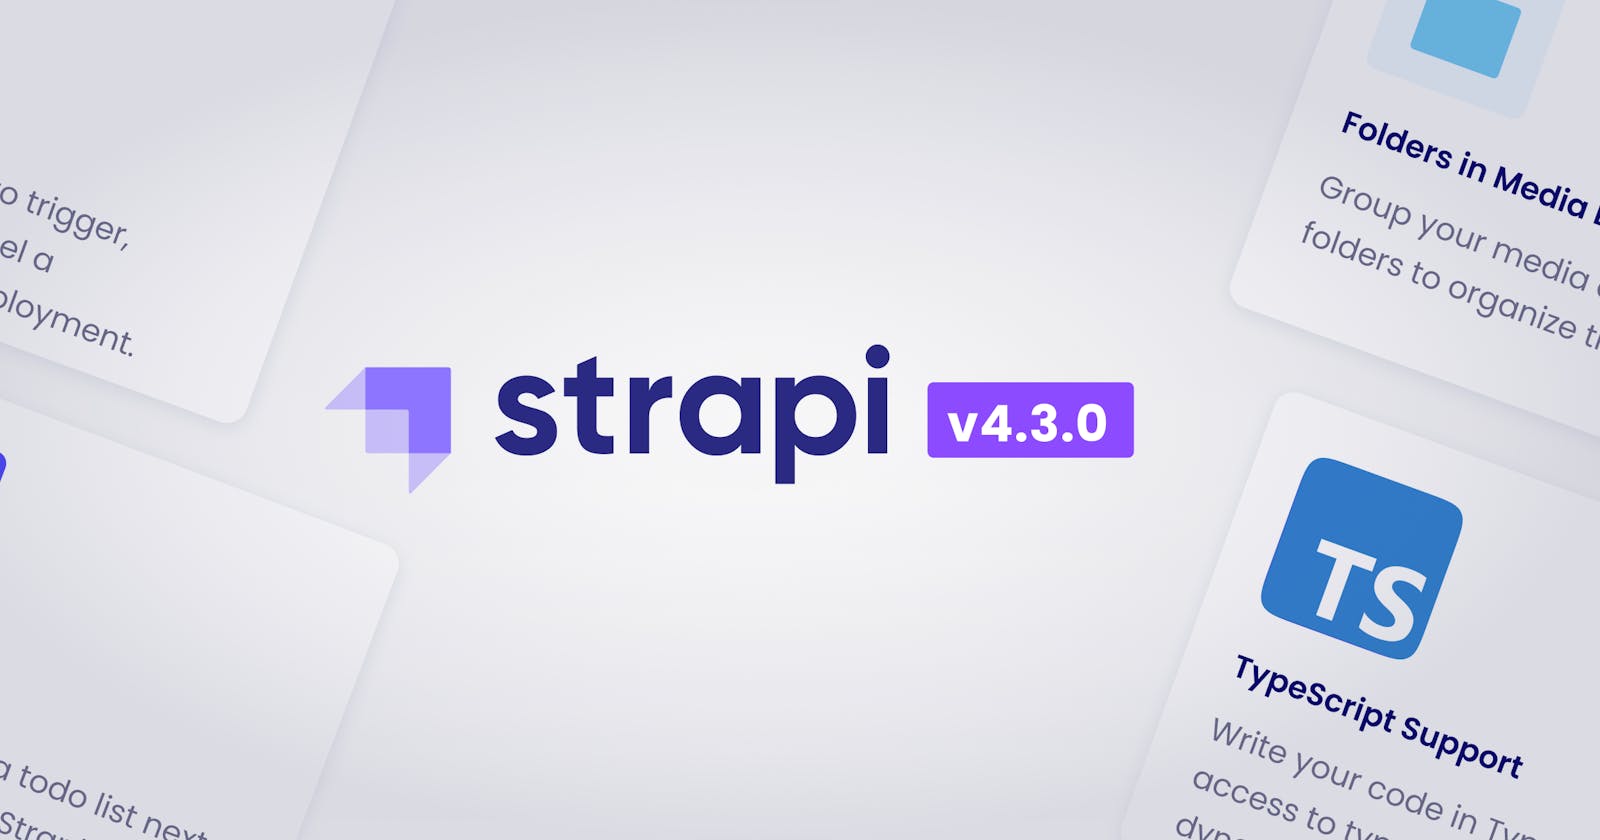 Strapi v4.3 with TypeScript support, Media library folders and more is live